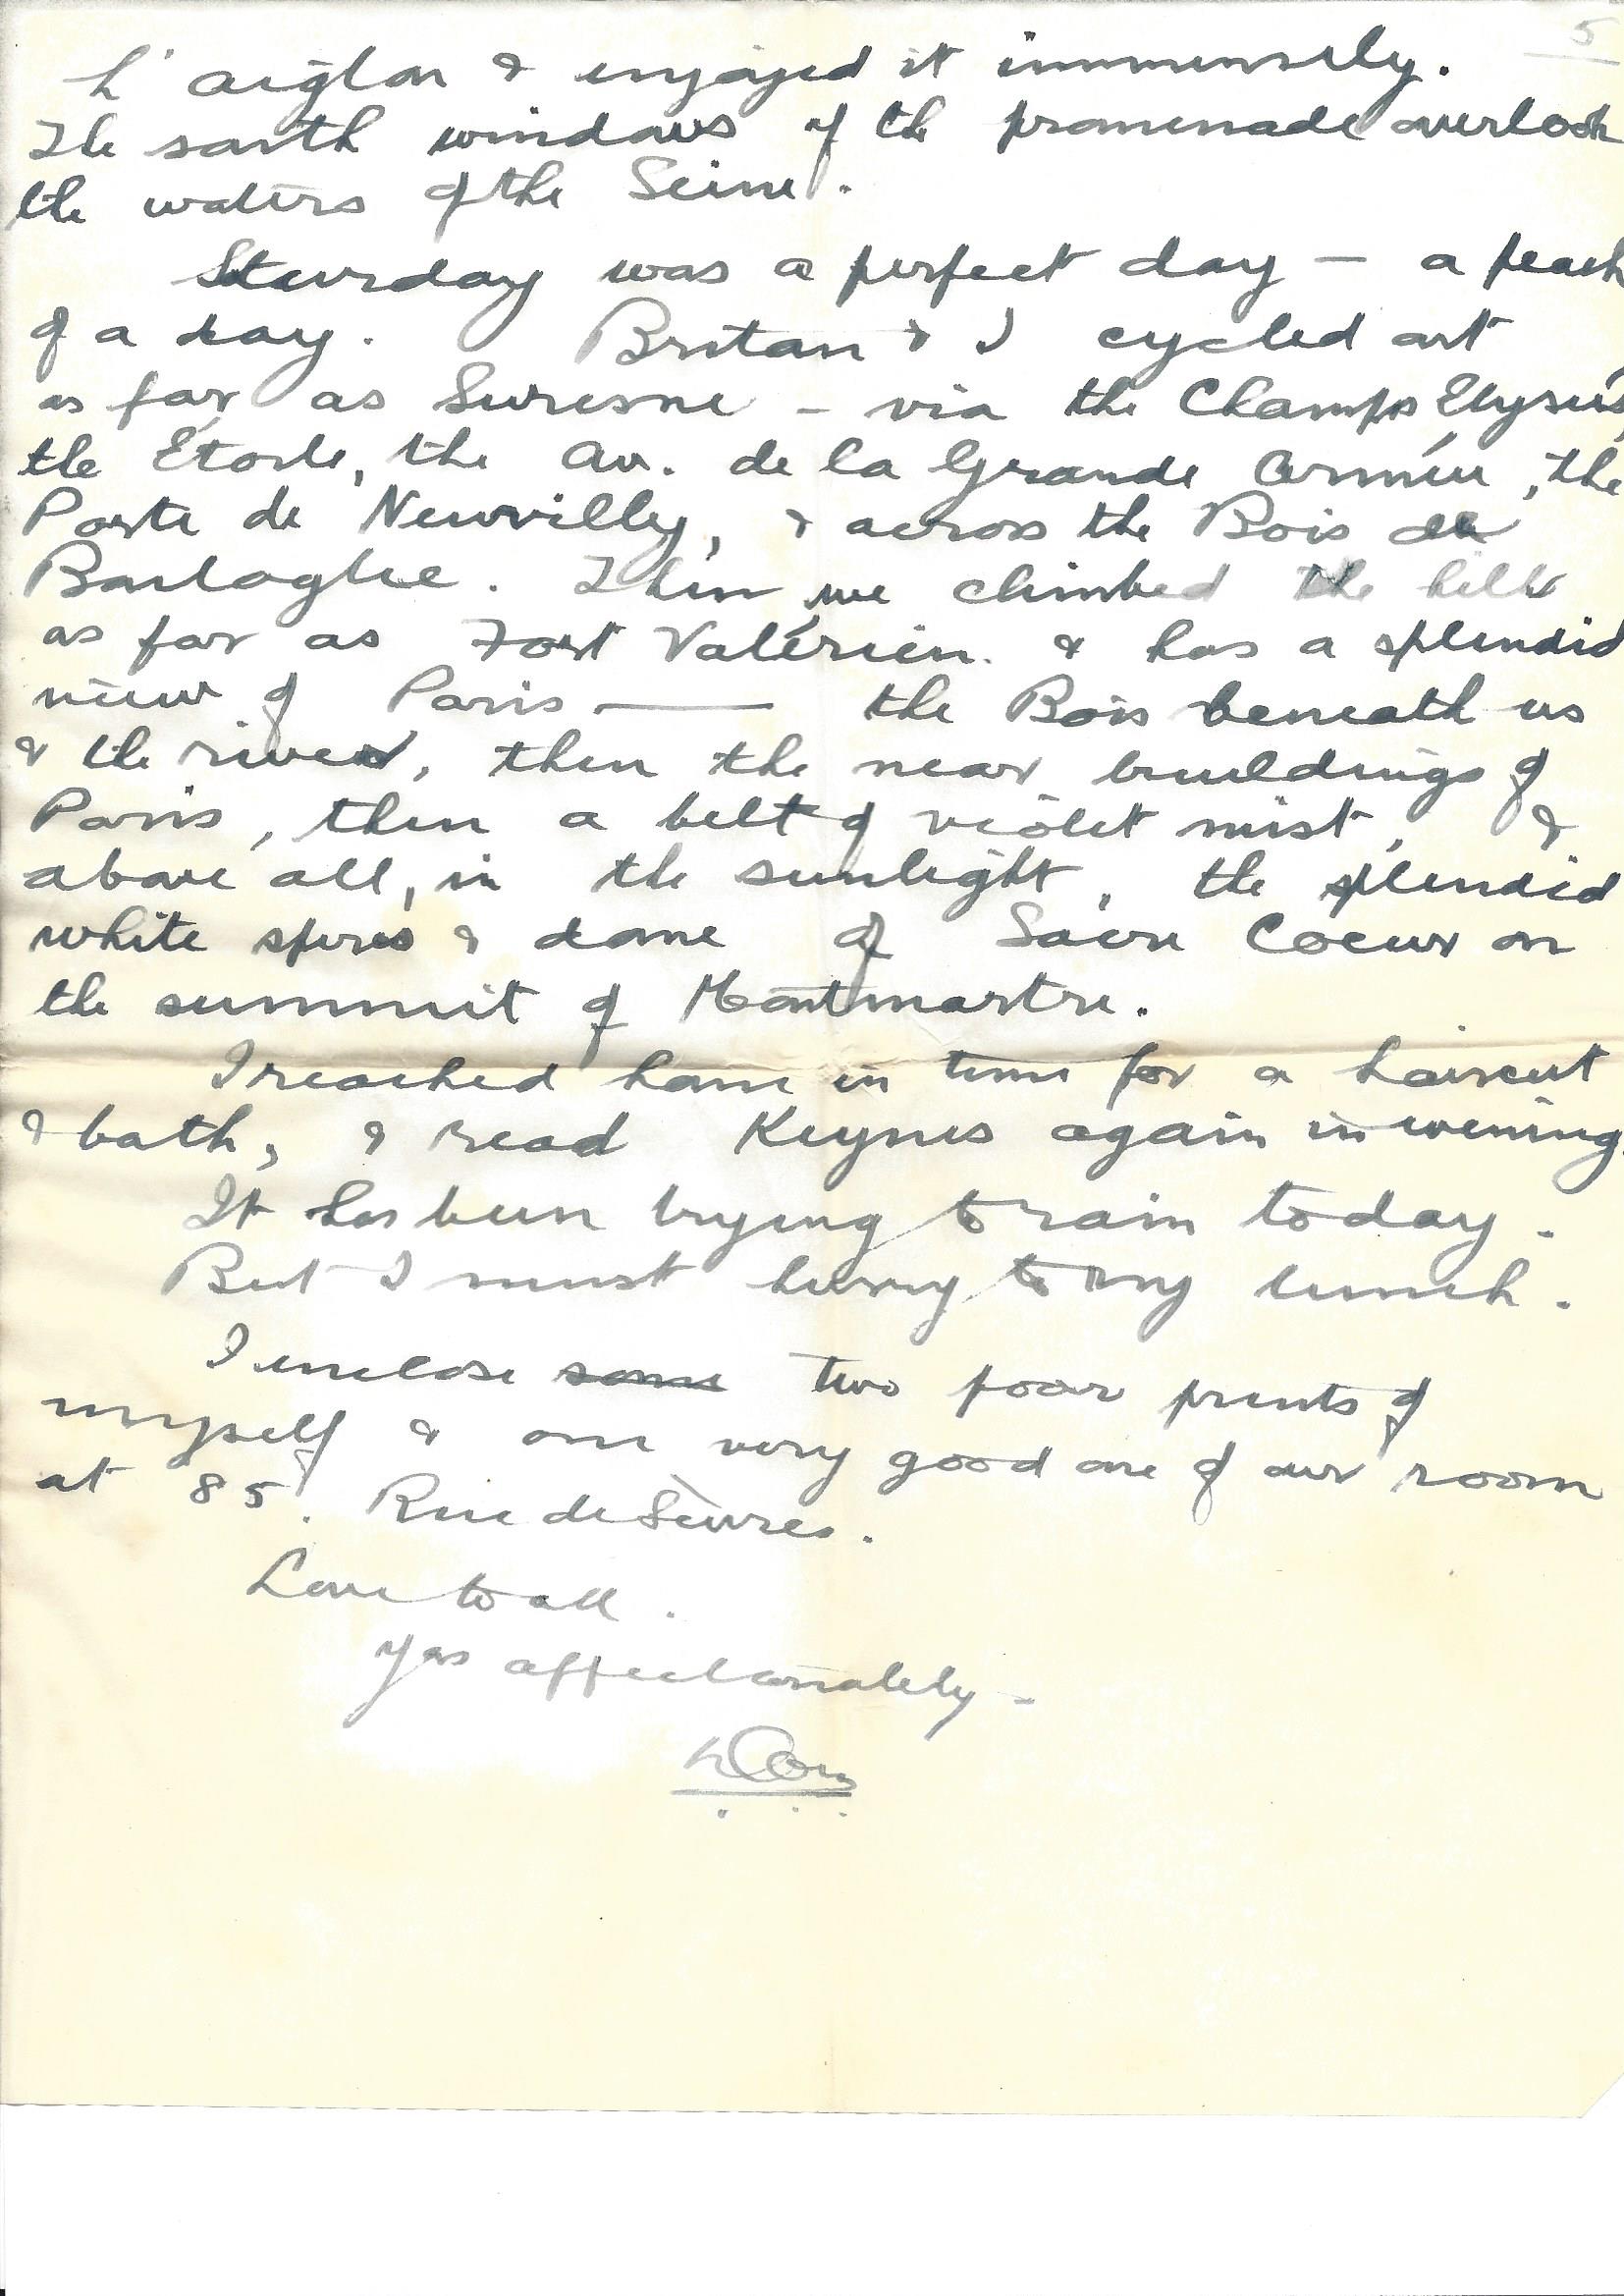 1920-01-18 page 6 letter by Donald Bearman